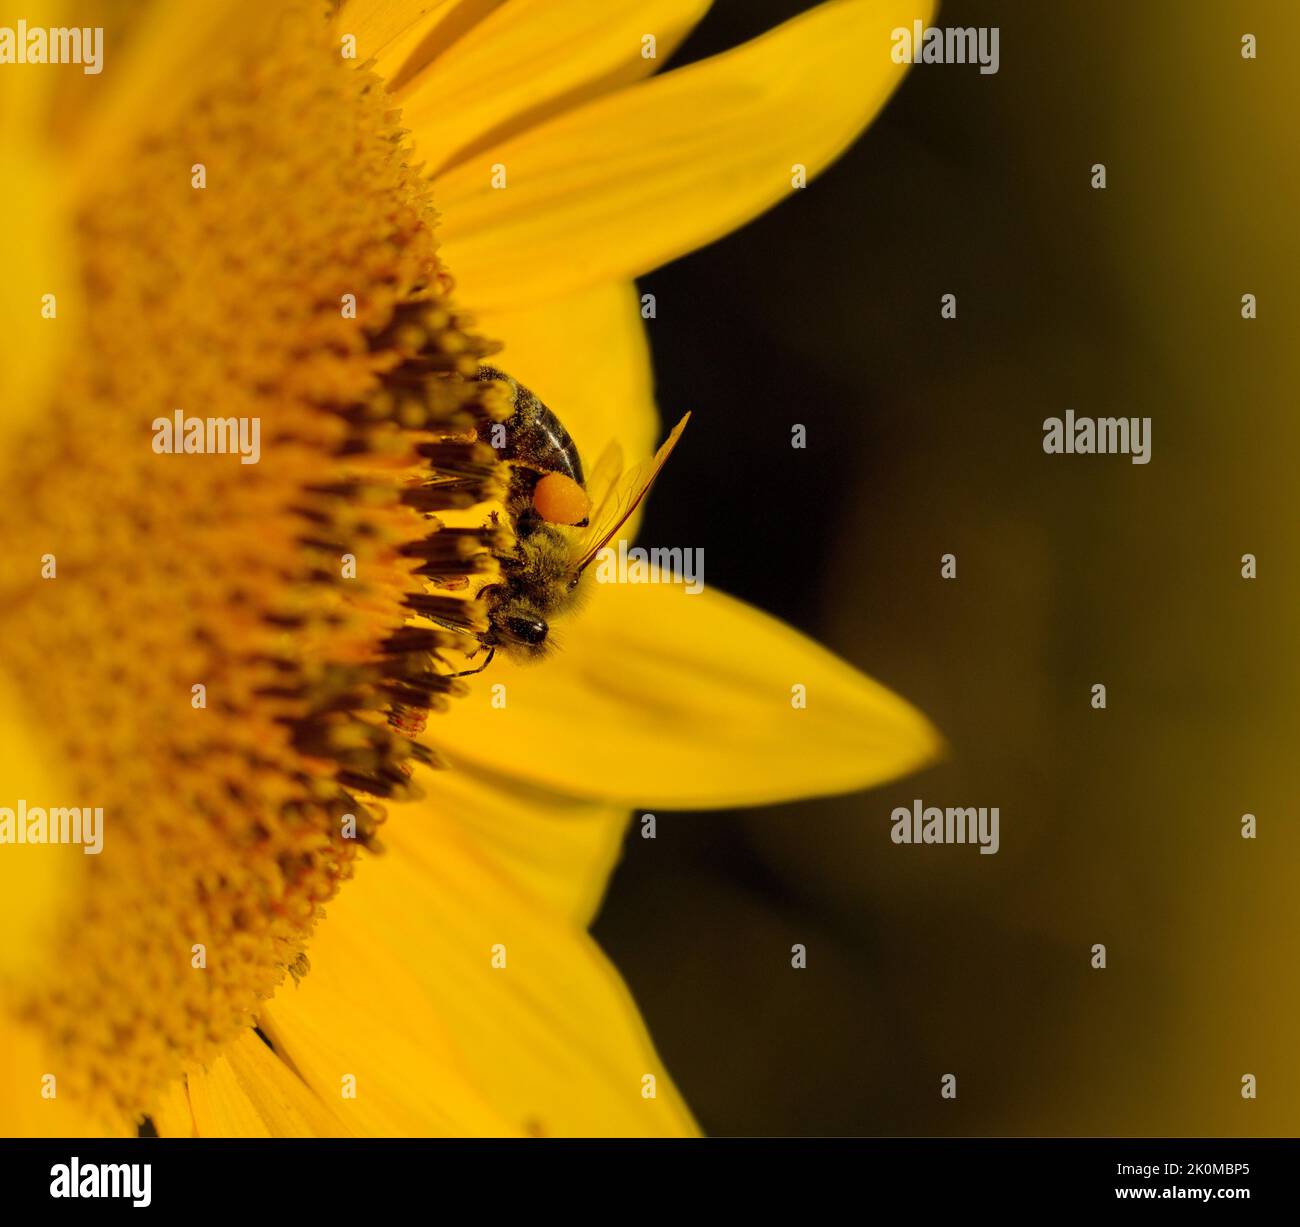 Macro of a honey bee on a sunflower in summer Stock Photo